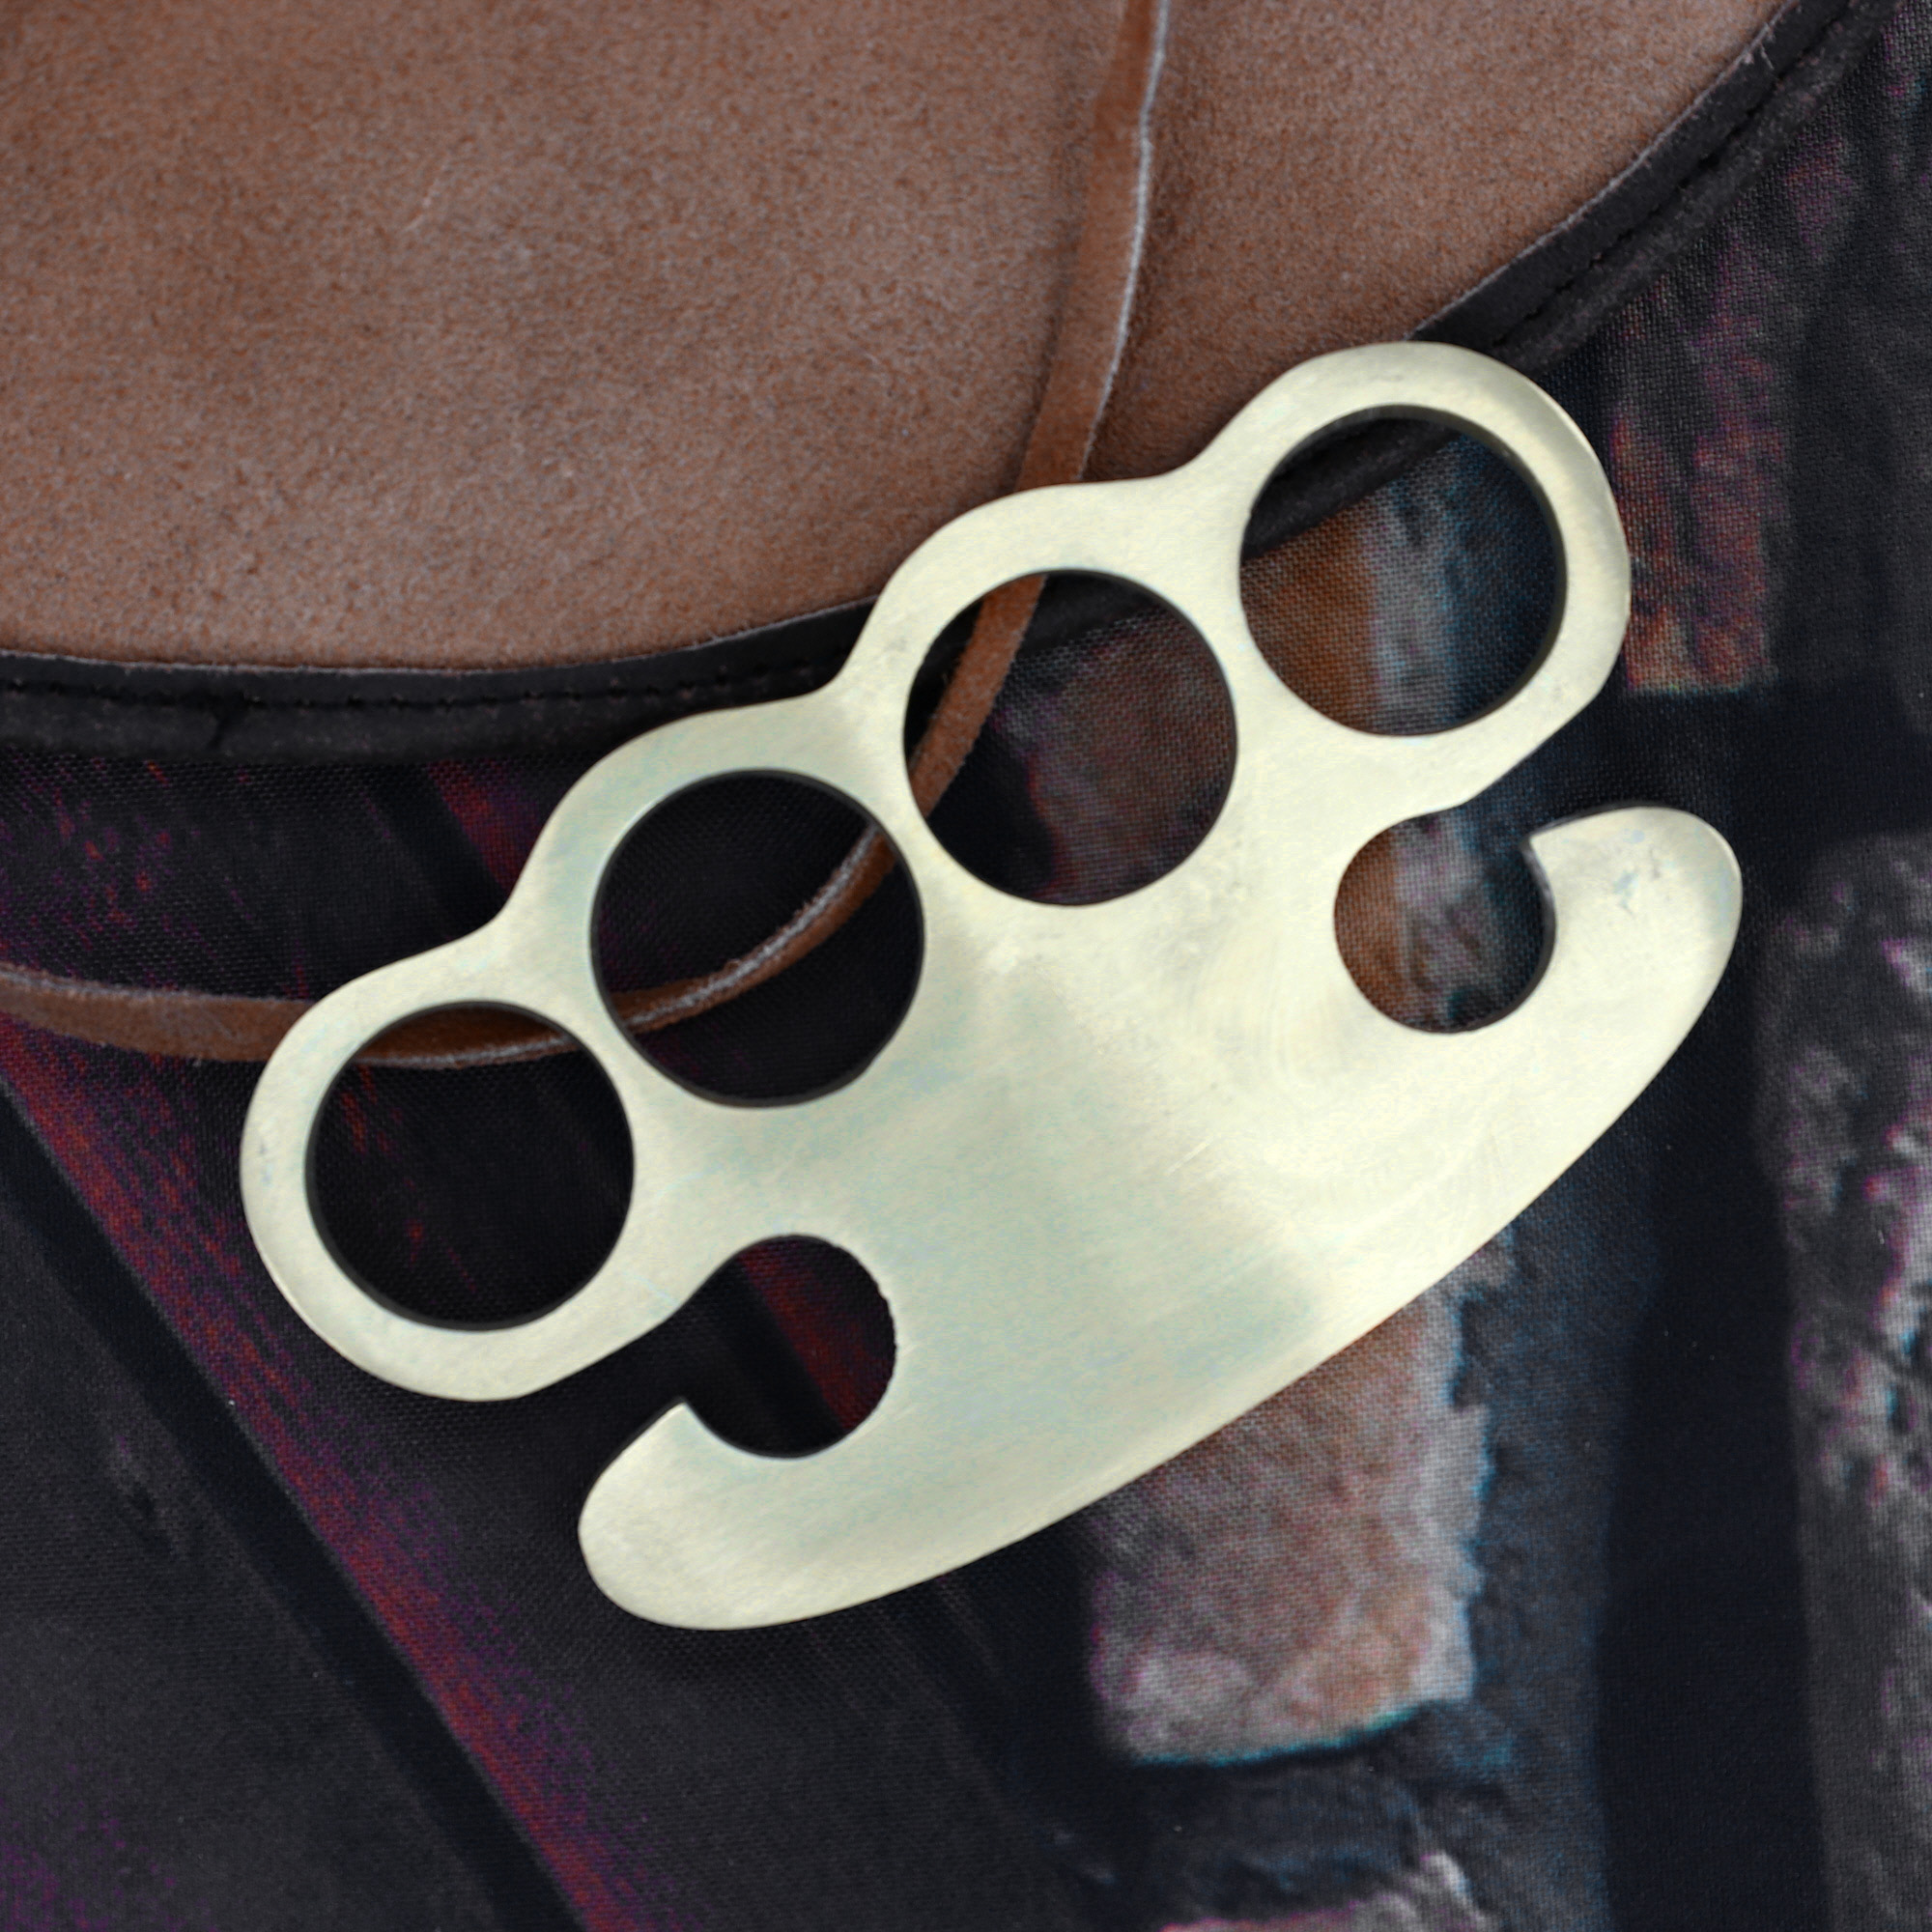 What A Hoot Pure Solid Brass Knuckle Duster Novelty Paper Weight